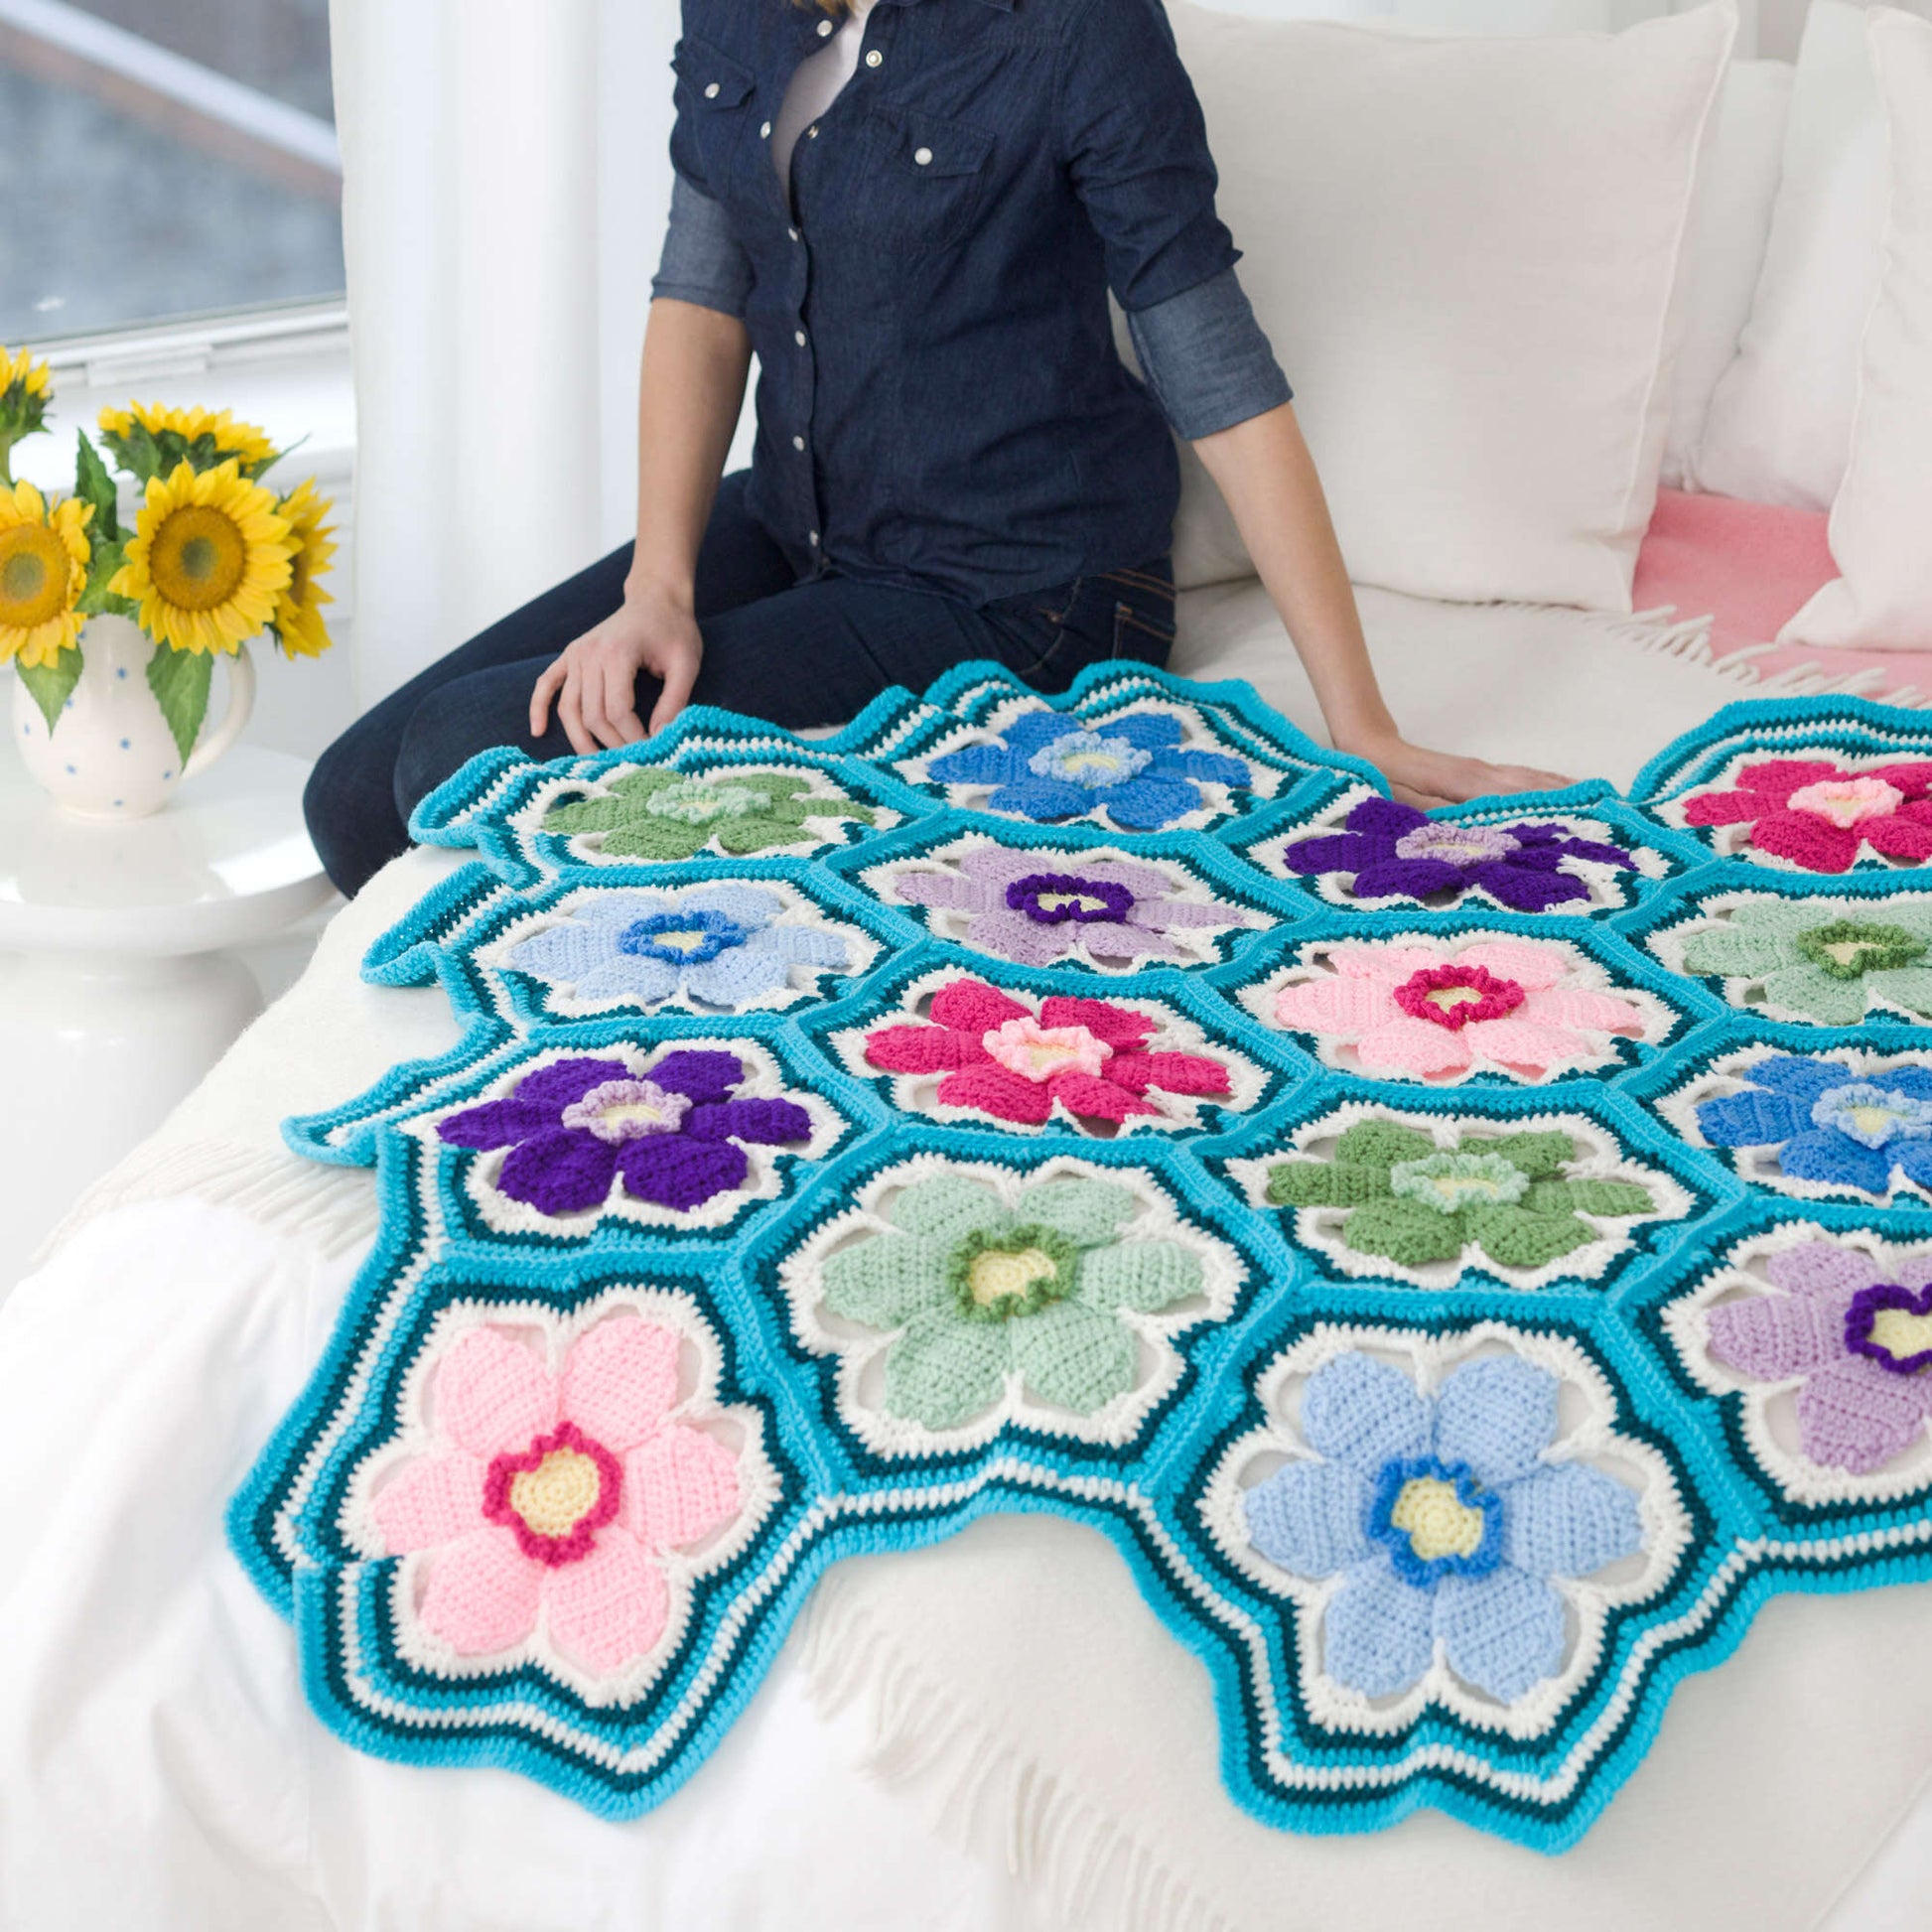 Free Red Heart Posey Throw Crochet Pattern